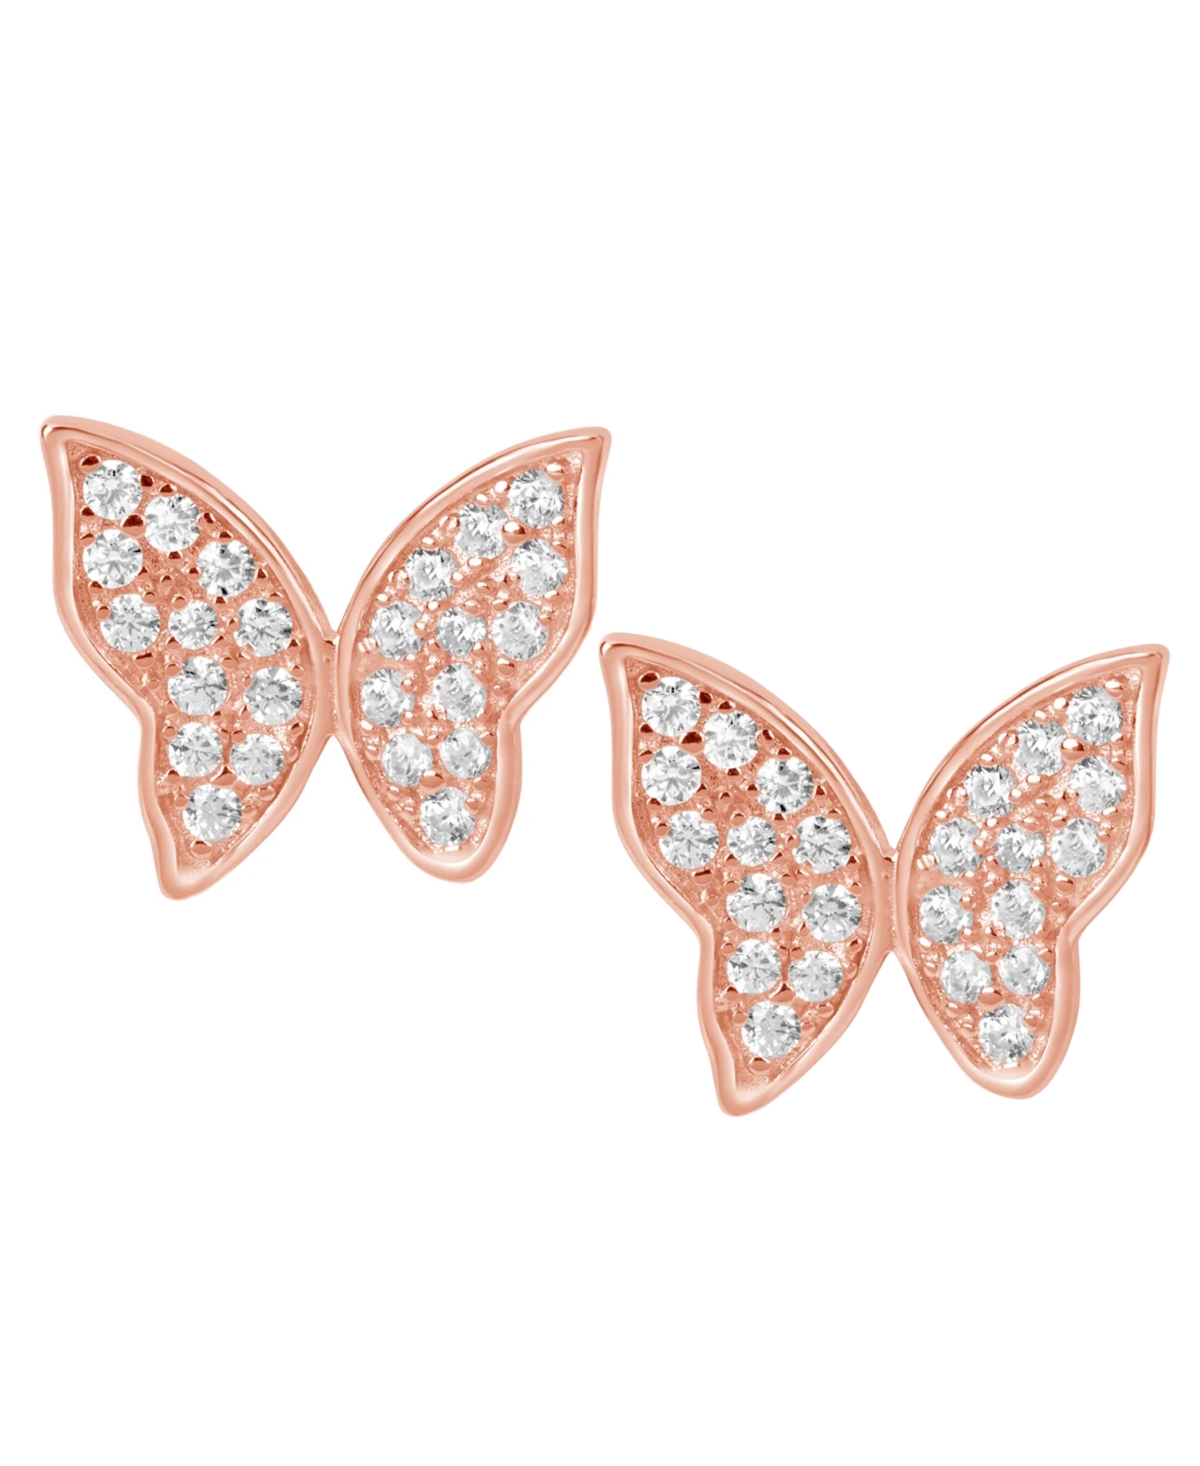 Suzy Levian Sterling Silver Cubic Zirconia Pave Butterfly Stud Earrings - Gold